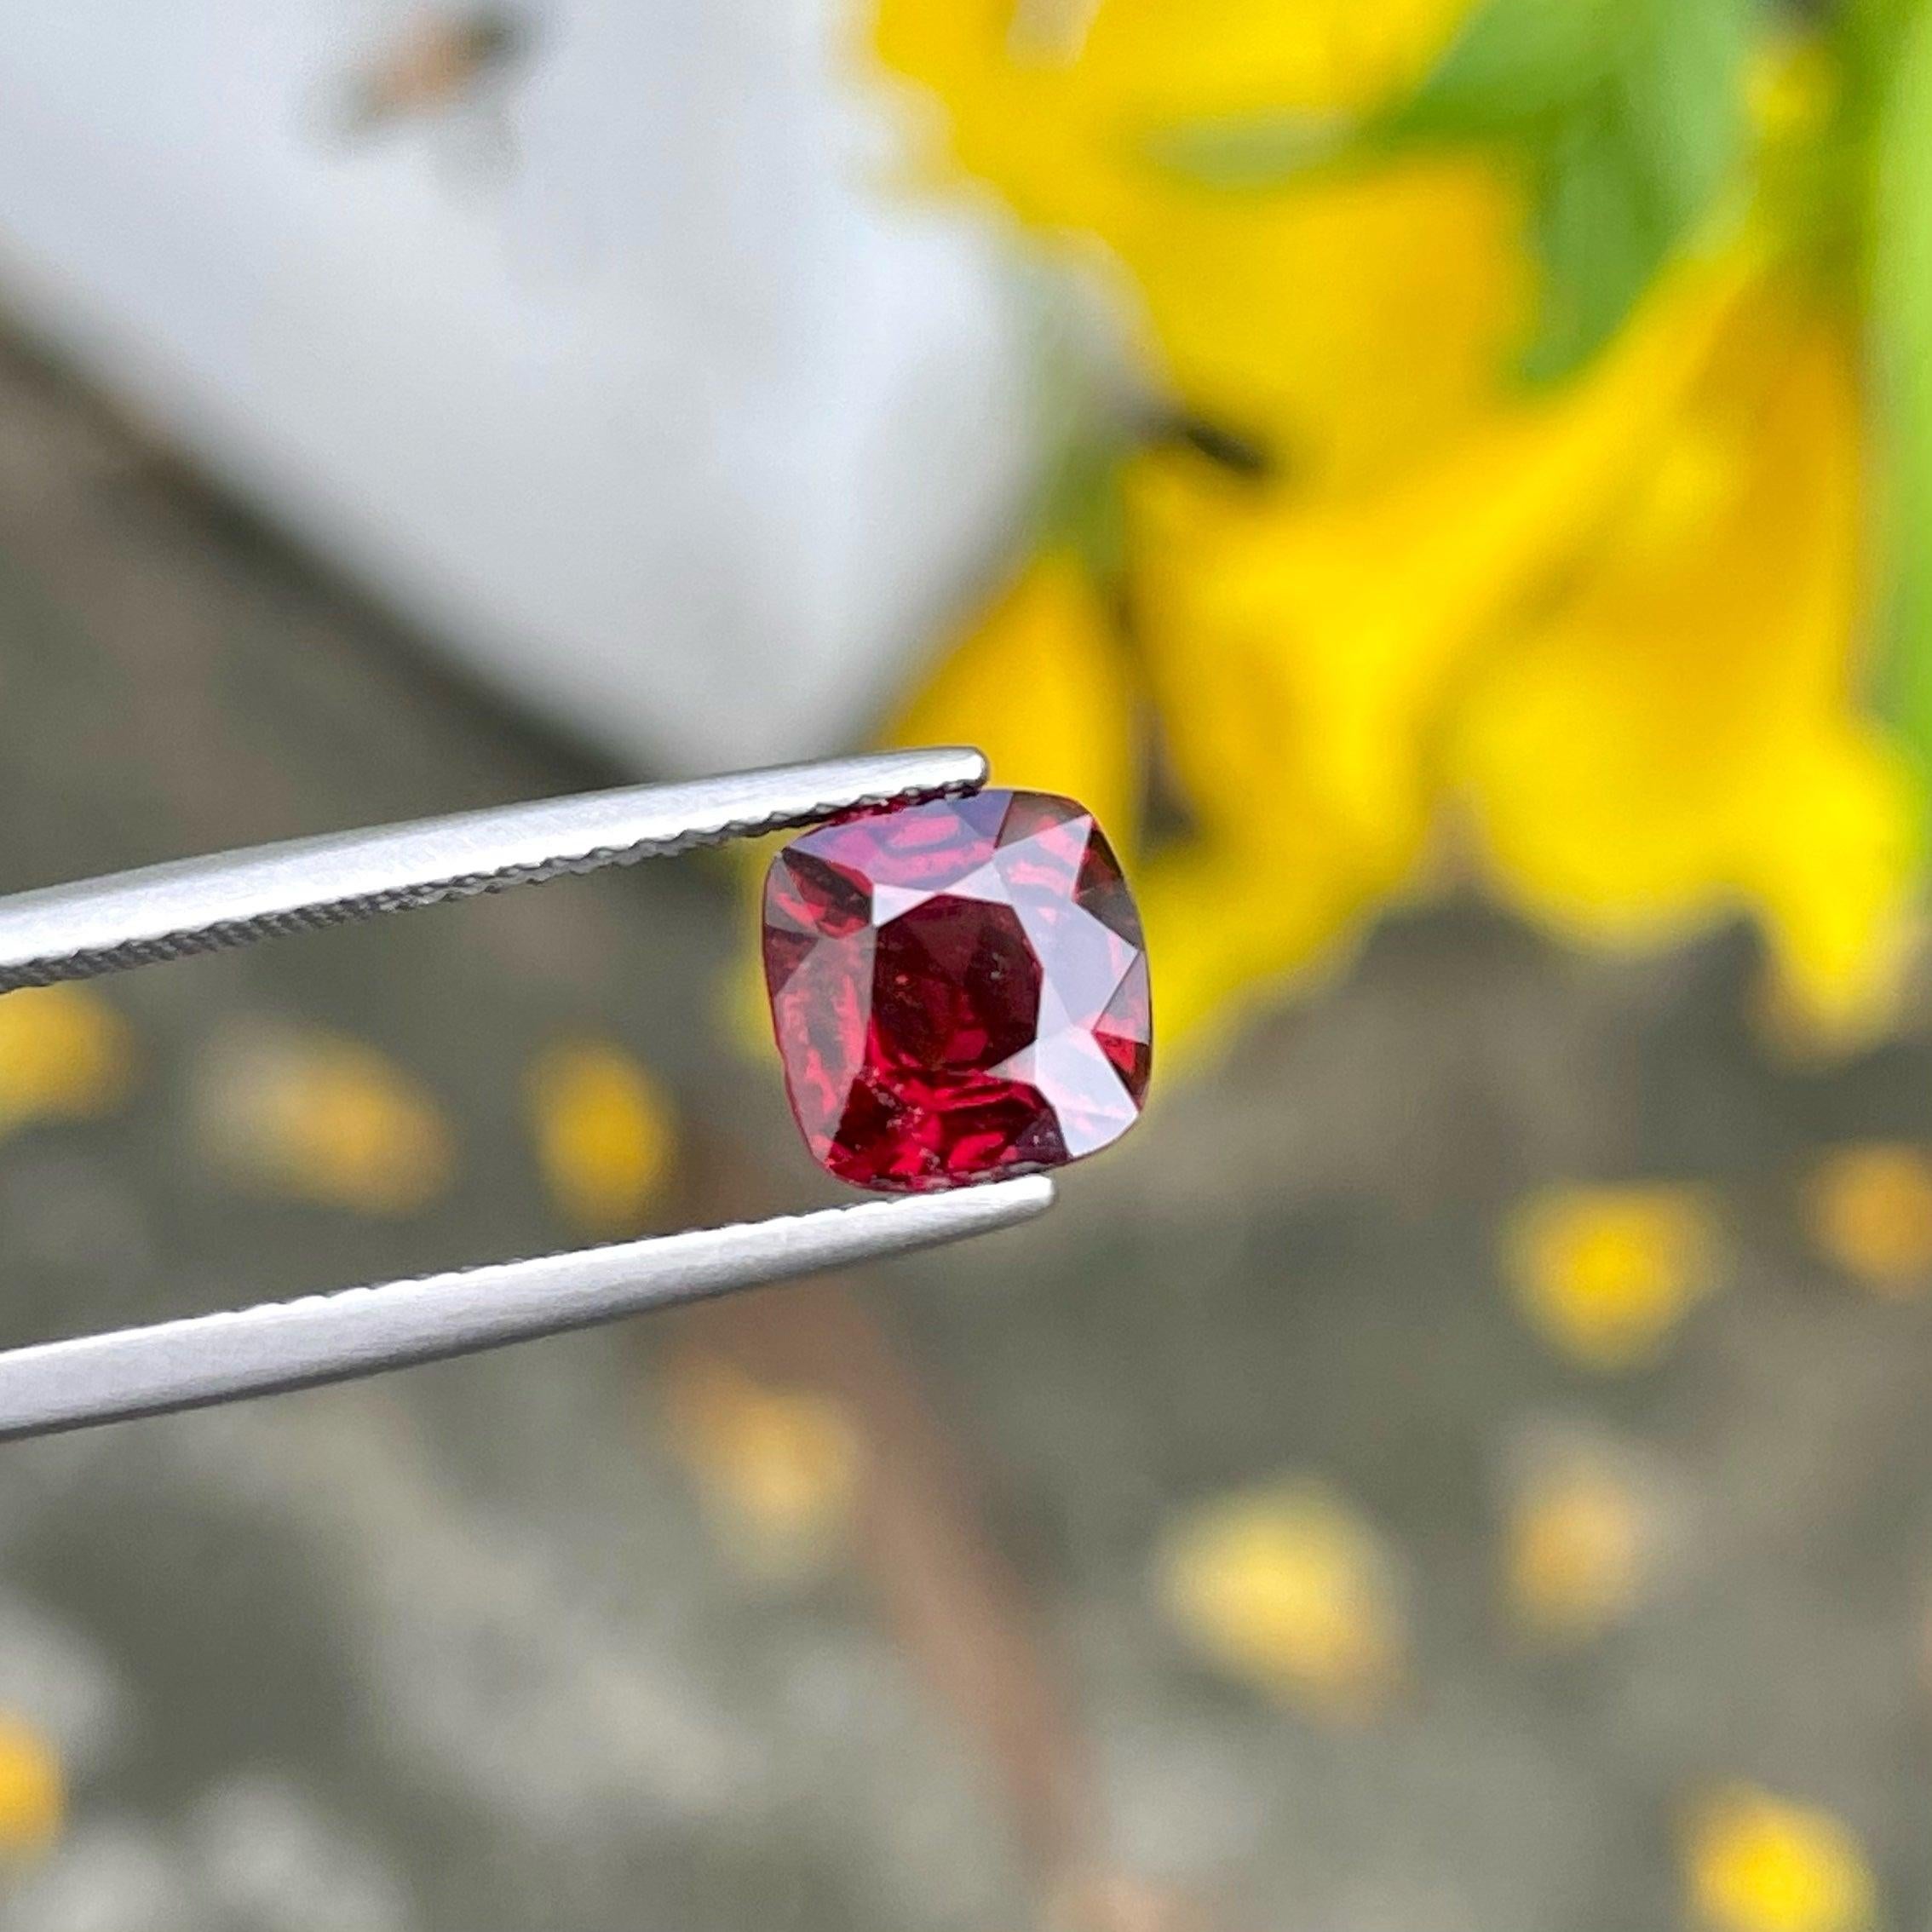 Red Burma Spinel Stone of 2.05 carats from Burma has a wonderful cut in a Cushion shape, incredible Red color. Great brilliance. This gem is VVS Clarity.

Product Information:
GEMSTONE TYPE:	Red Burma Spinel Stone
WEIGHT:	2.05 Carats
DIMENSIONS:	7.6